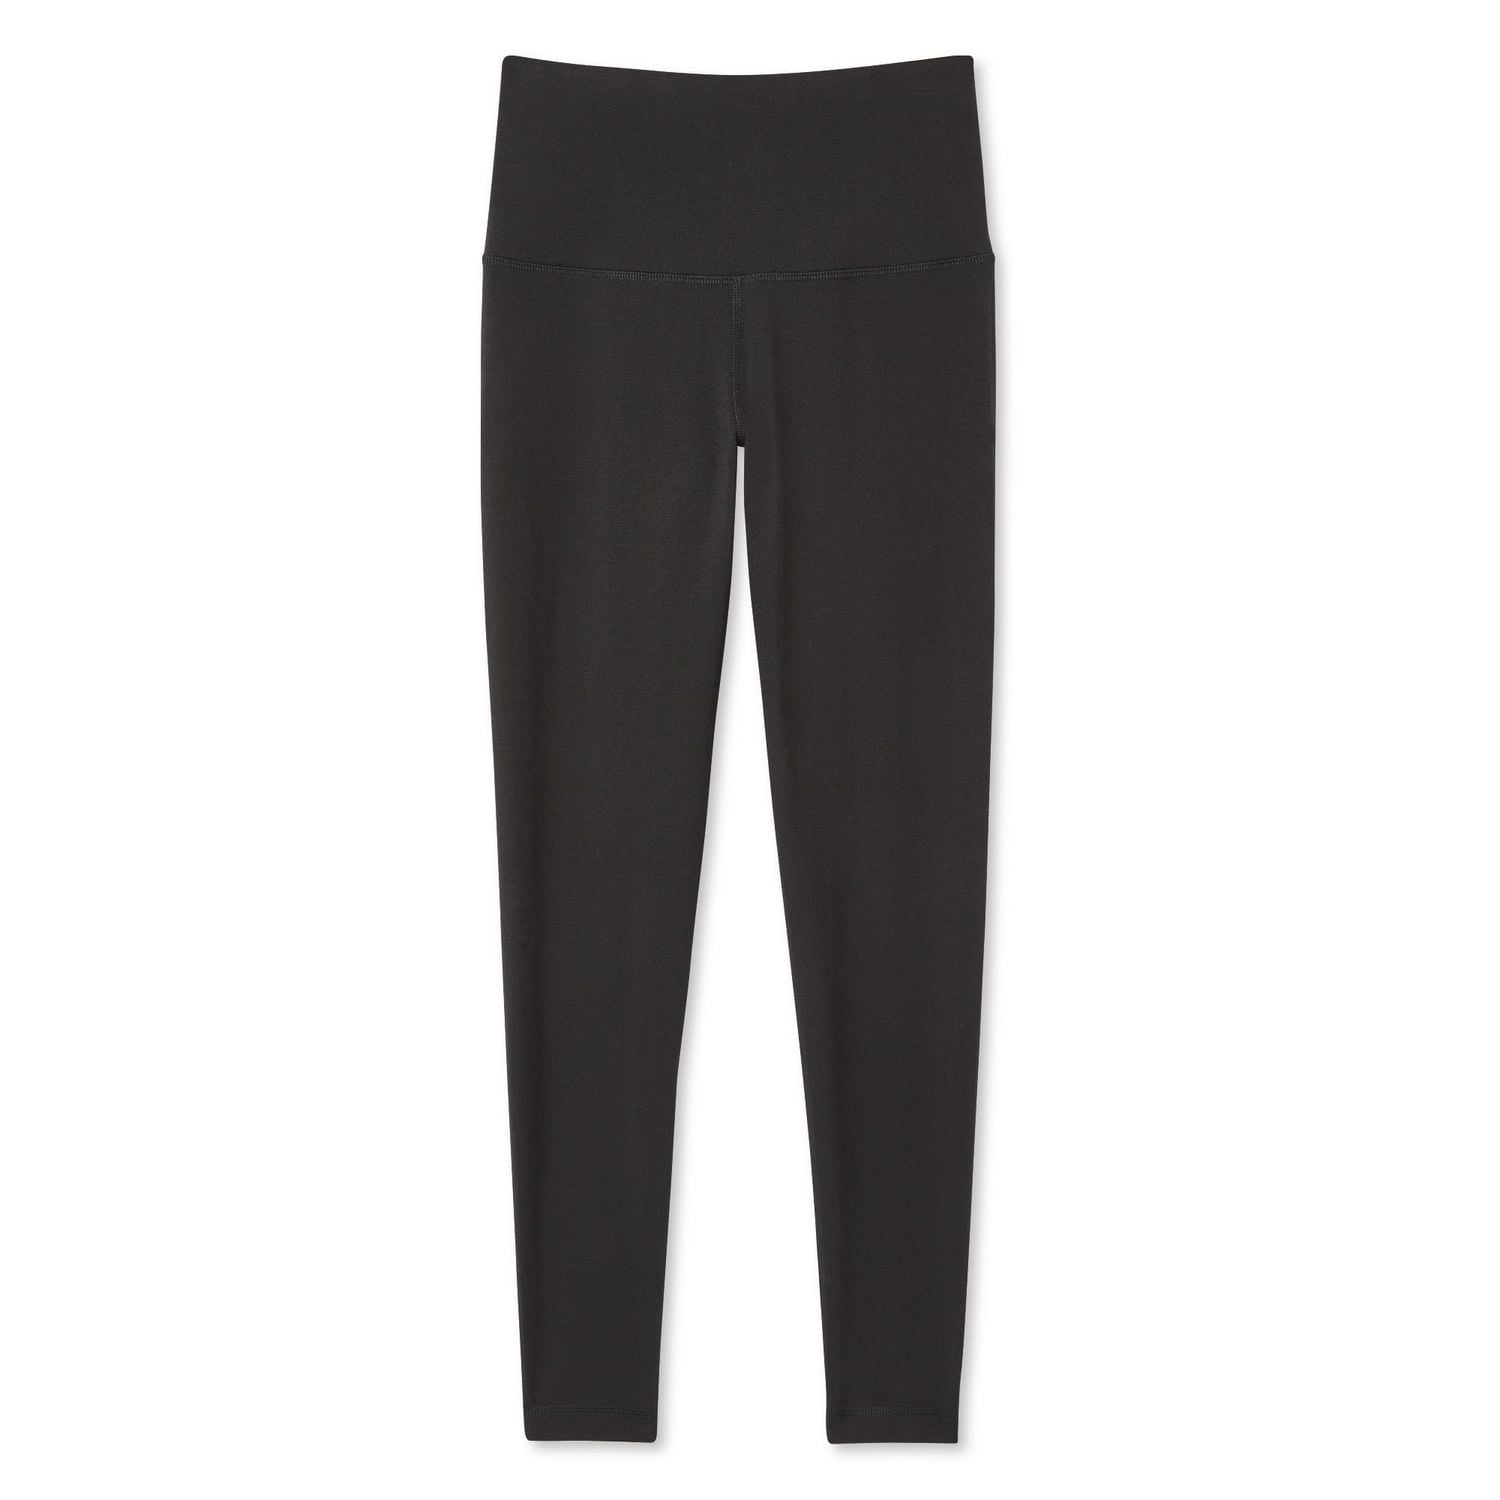 These Comfy Travel Pants Are 54% Off at Athleta